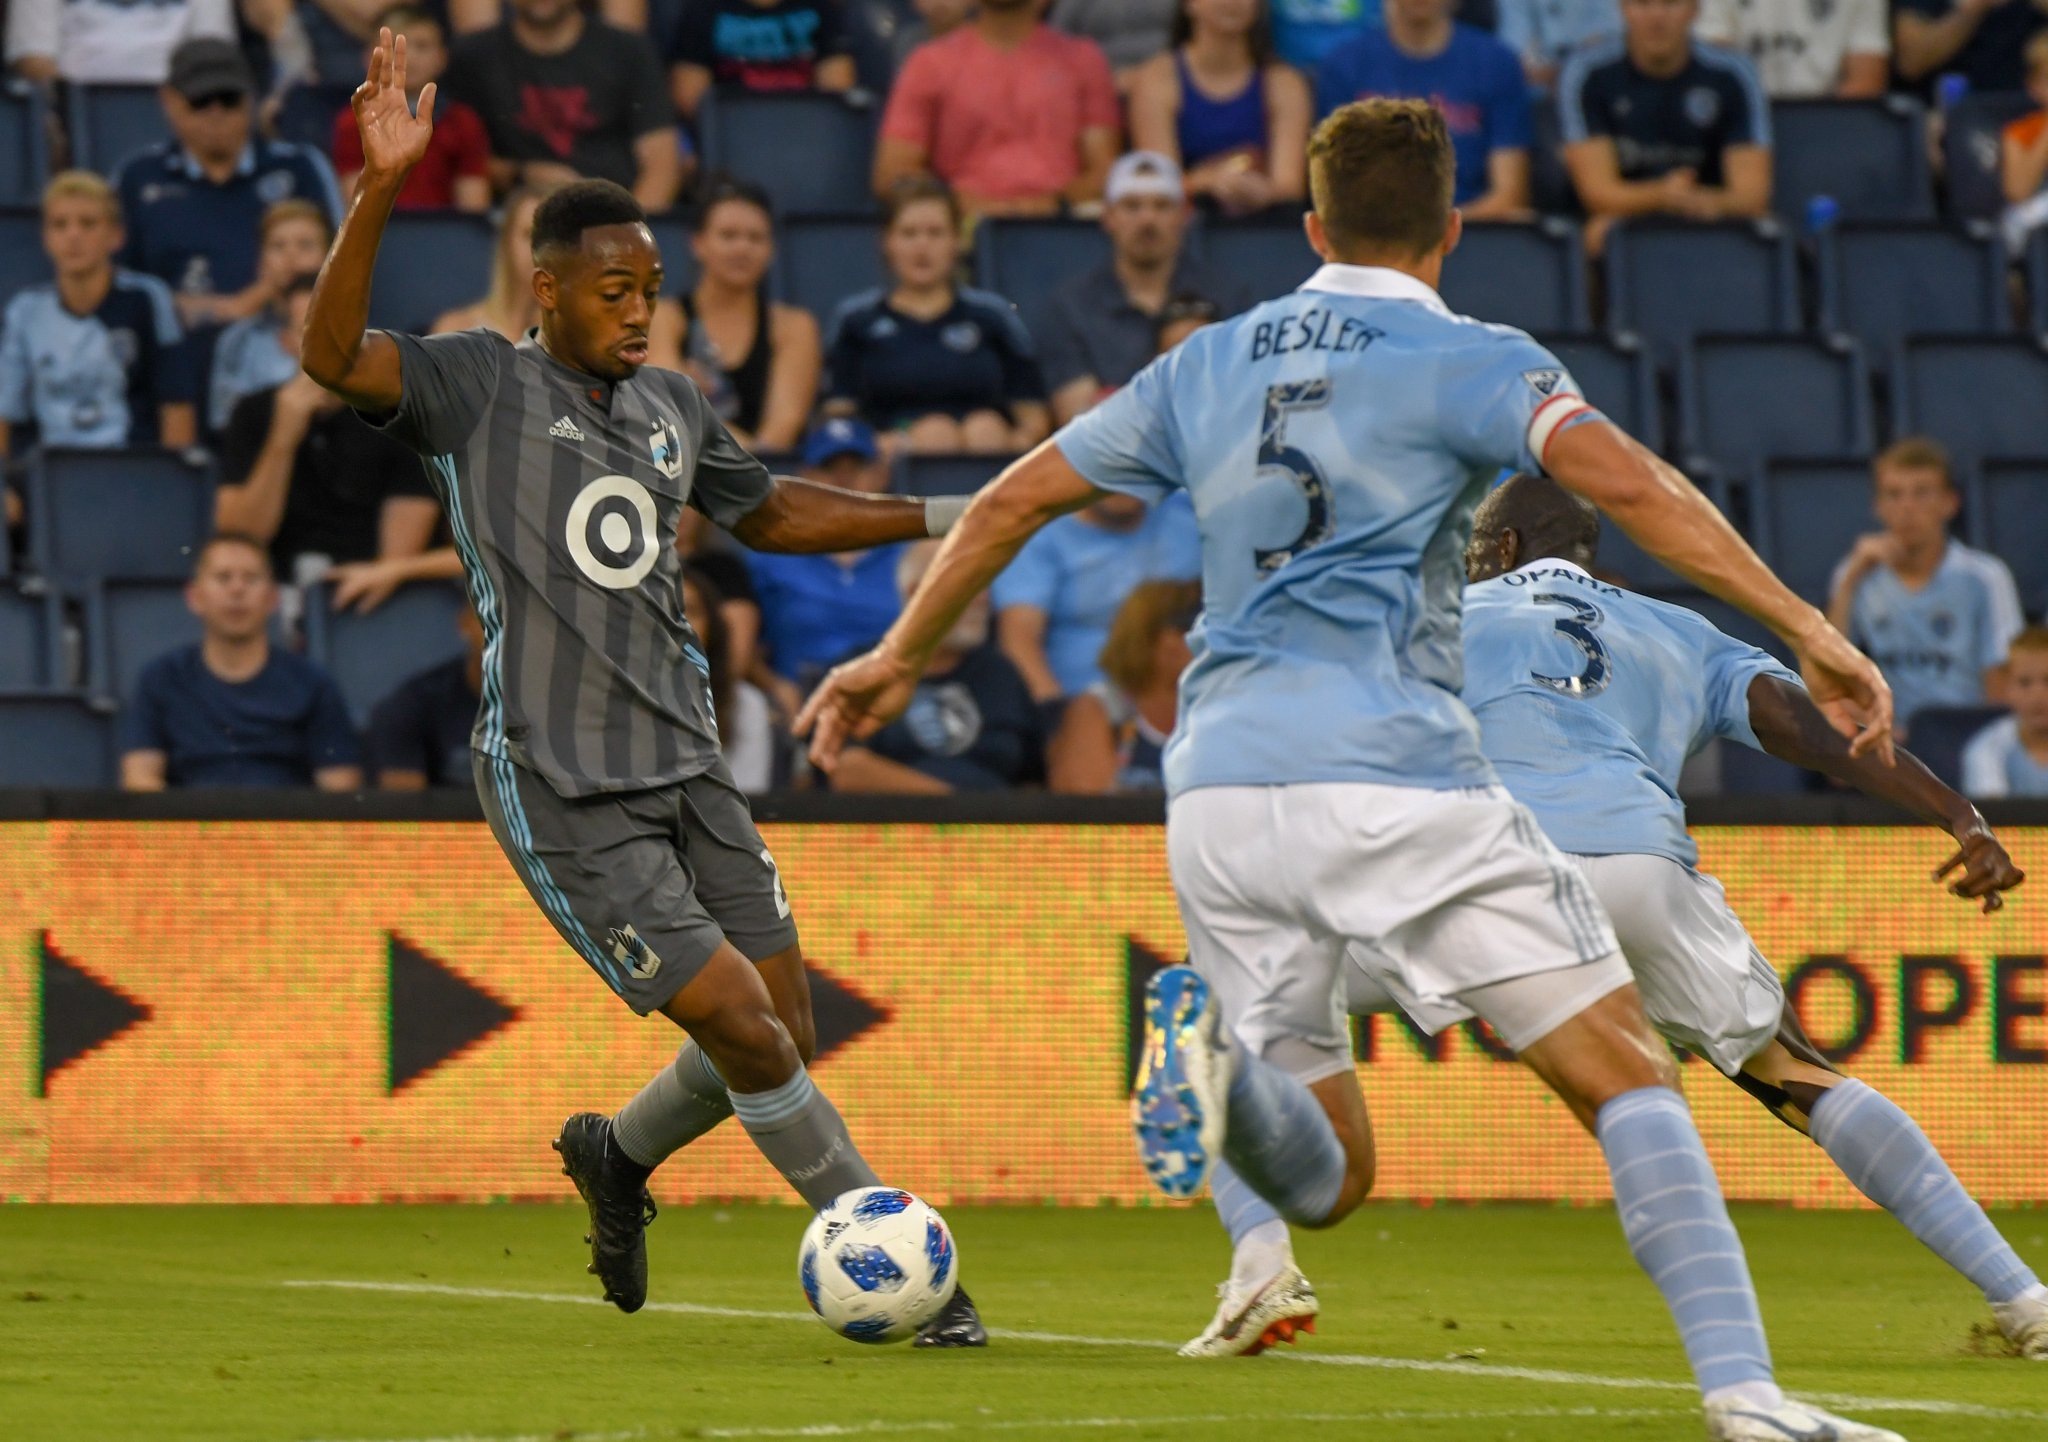 Matchdays Twenty-Five and-Twenty Six: Horrible Road Trip Continues, With Losses In Frisco And Kansas City